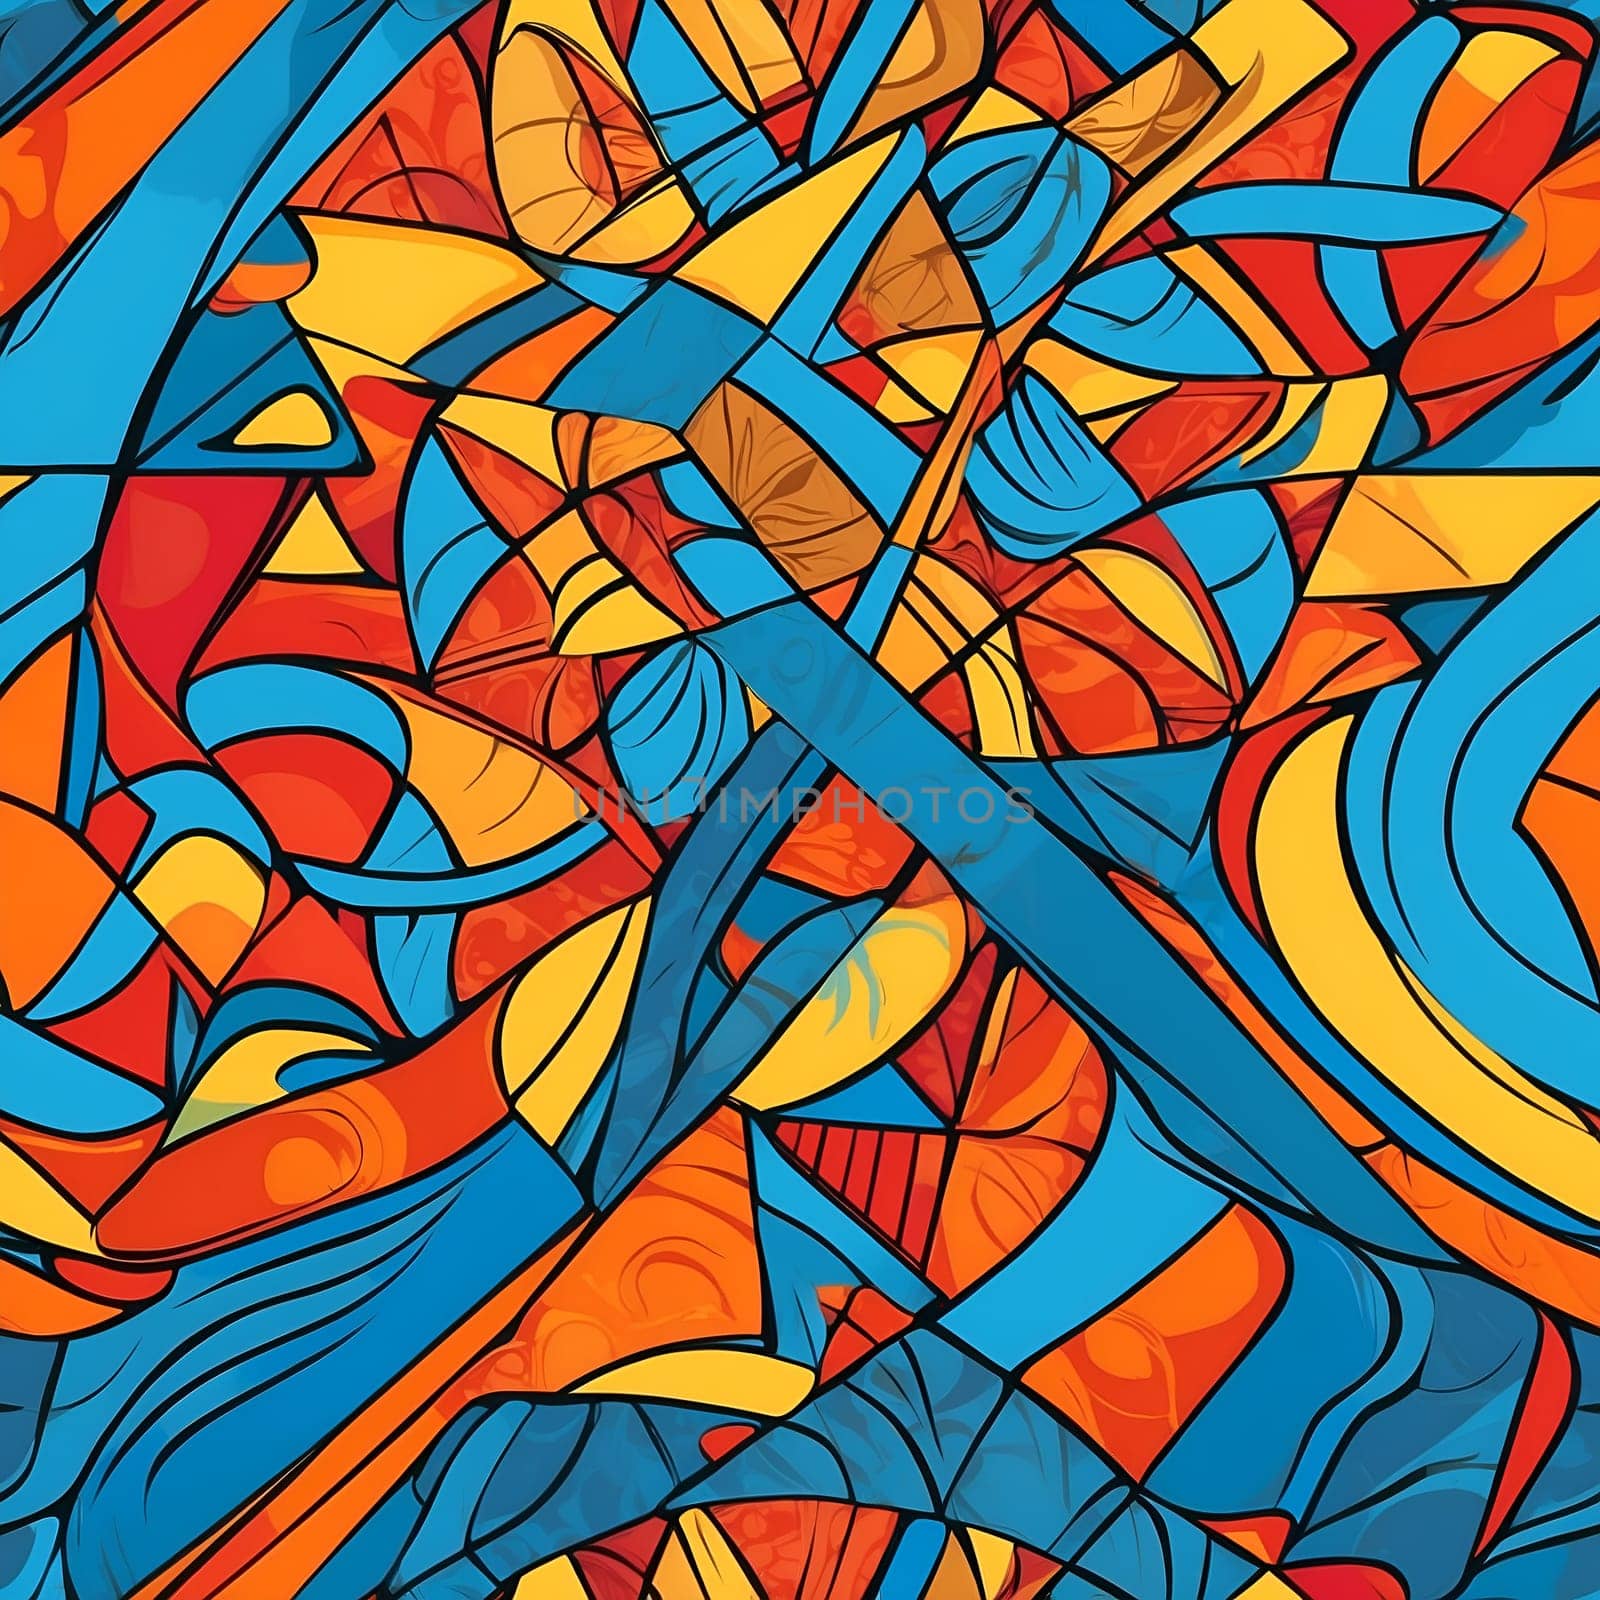 A seamless pattern showcasing a painting with a vibrant blue and orange abstract design.